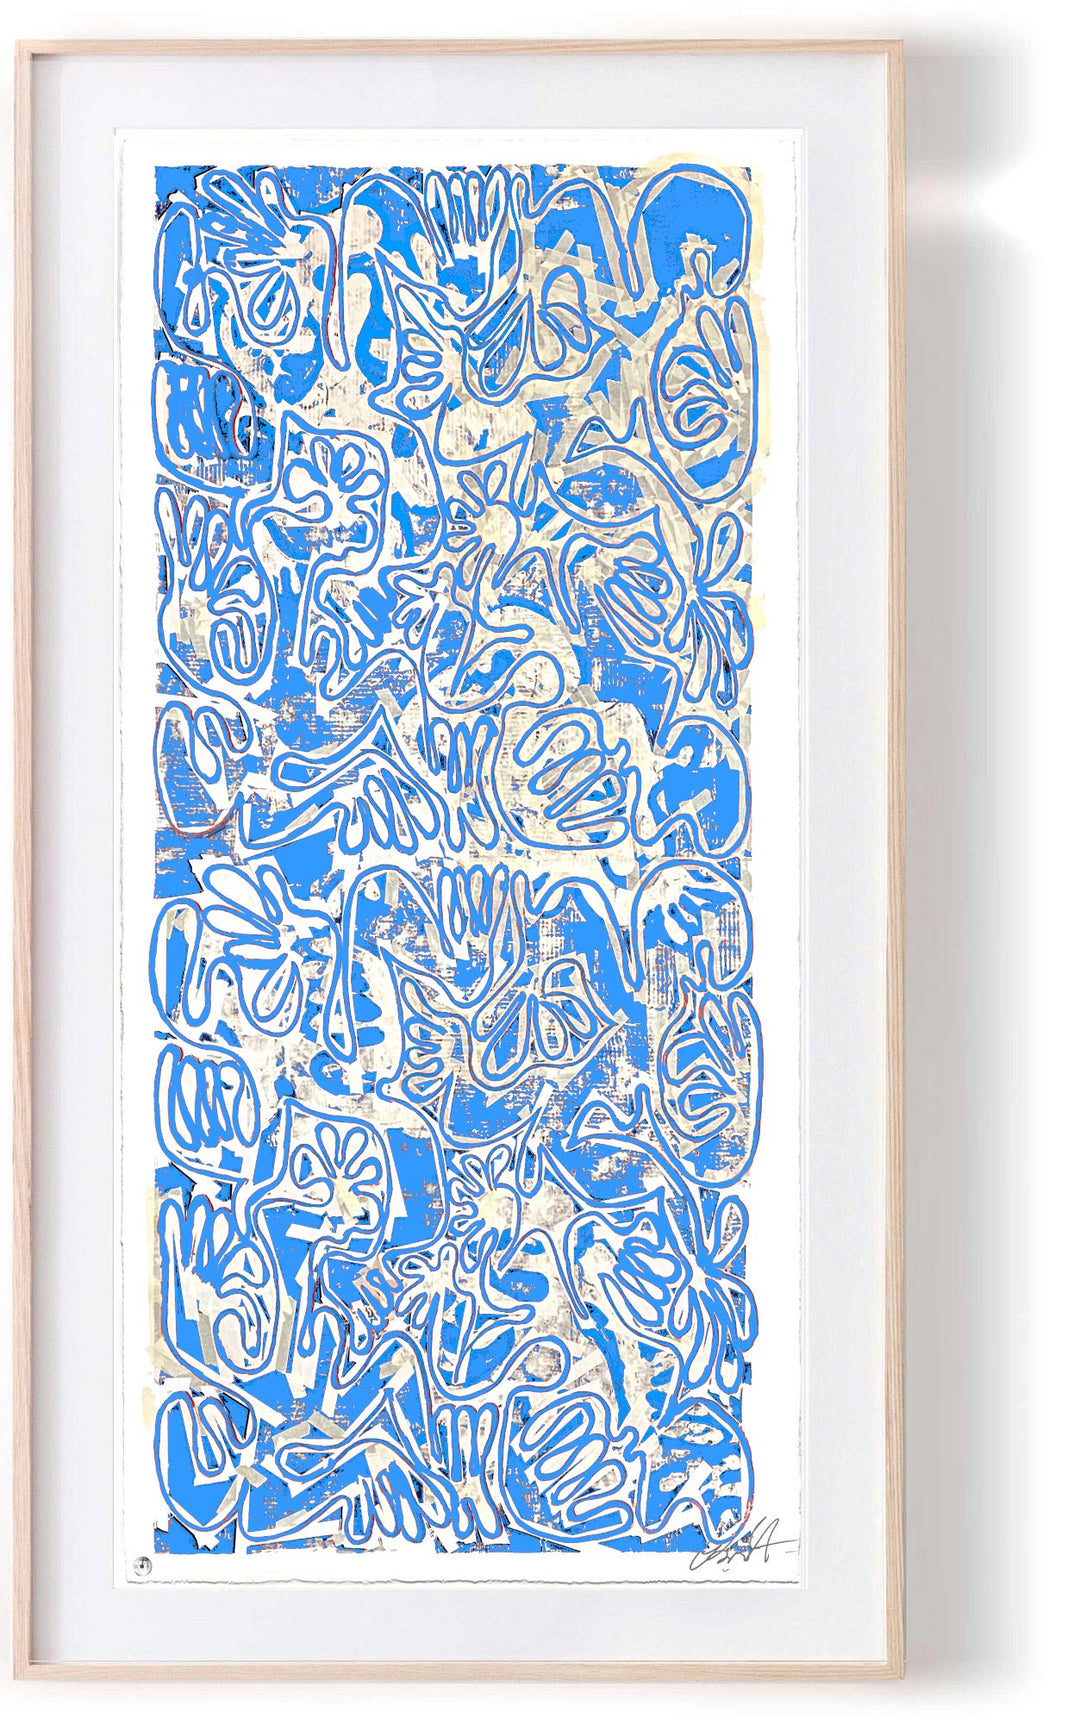 "Covid Chaos Pacific Blue (40 x 100in)" by Robert Santore ©2022. Framed, Hand painted artist silkscreen print, hand printed on the finest archival cold press cotton rag paper with hand torn edges. Painted in the Manhattan studio.